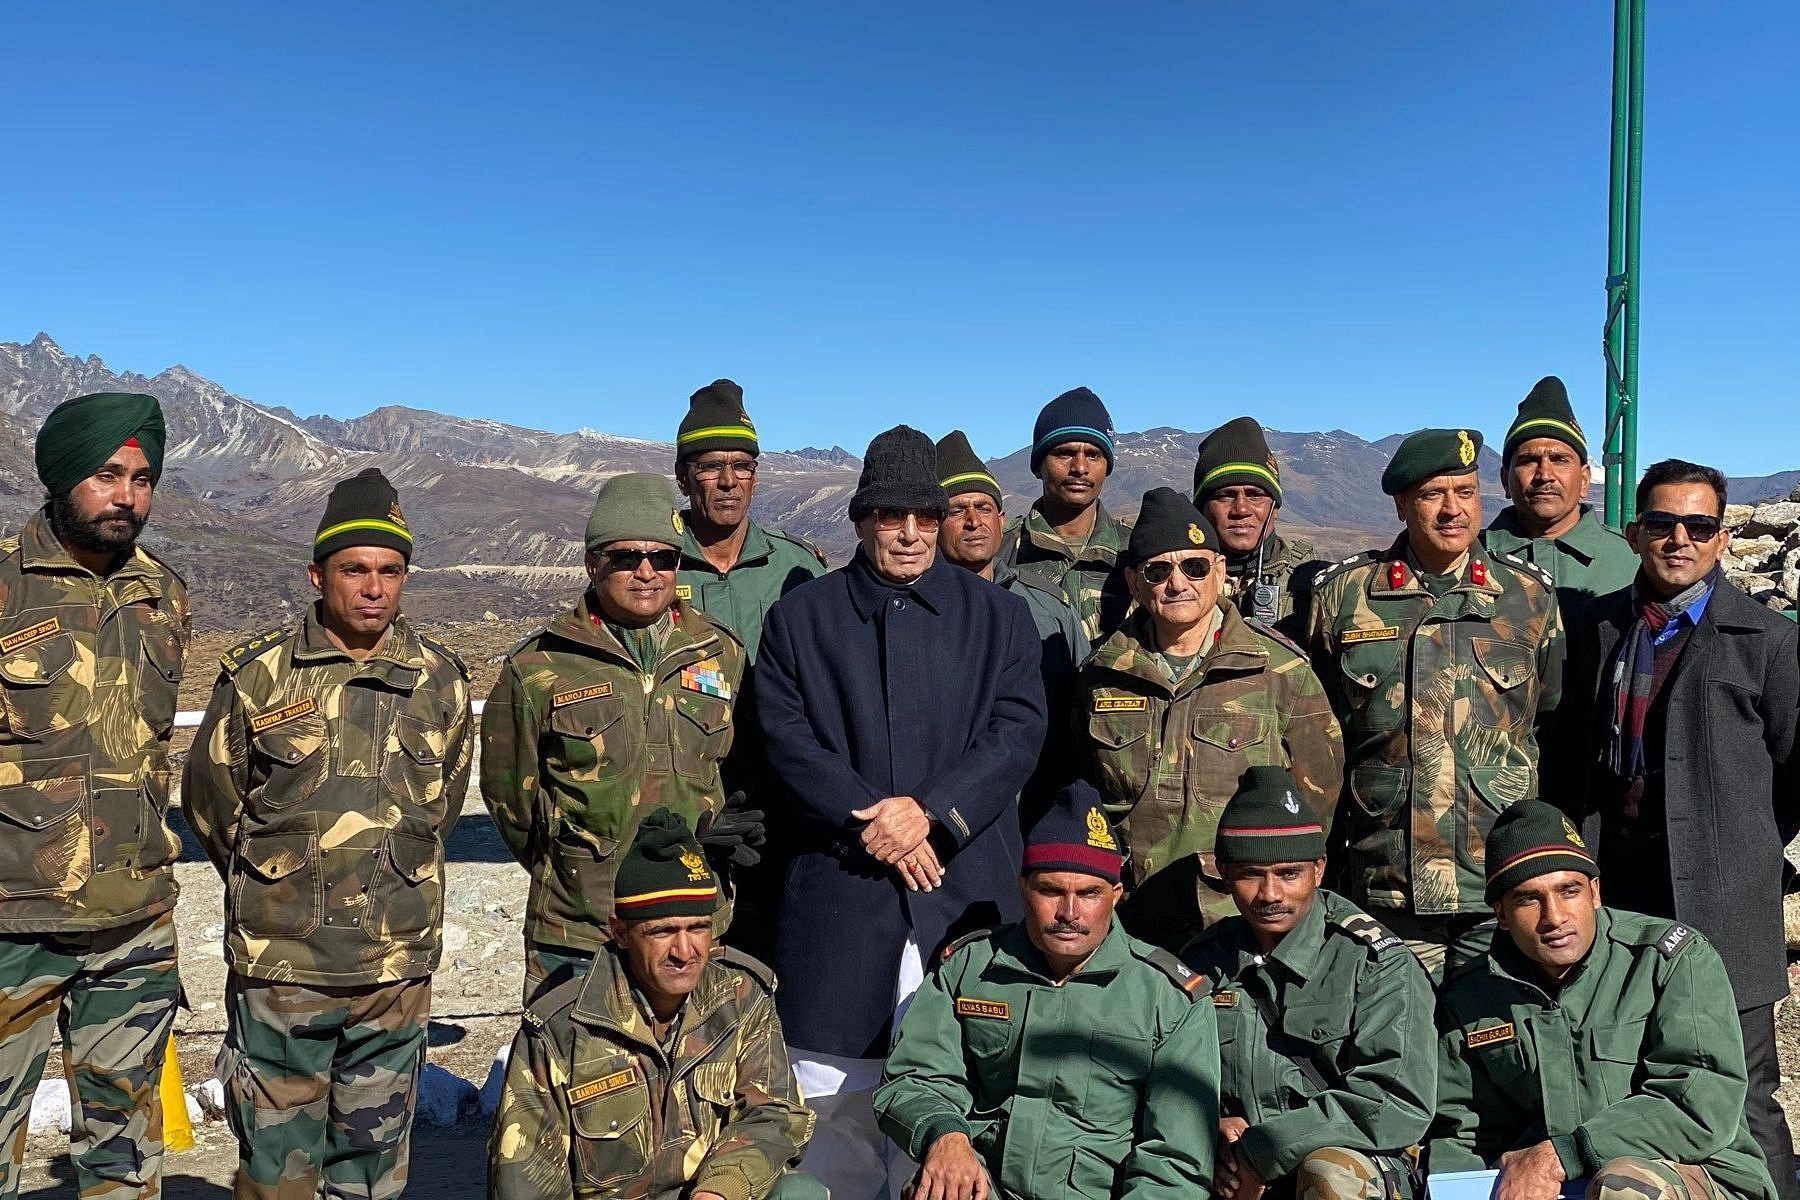 Defence Minister Rajnath Singh with Indian Army officials in Bum La, Arunachal (@rajnathsingh/Twitter)